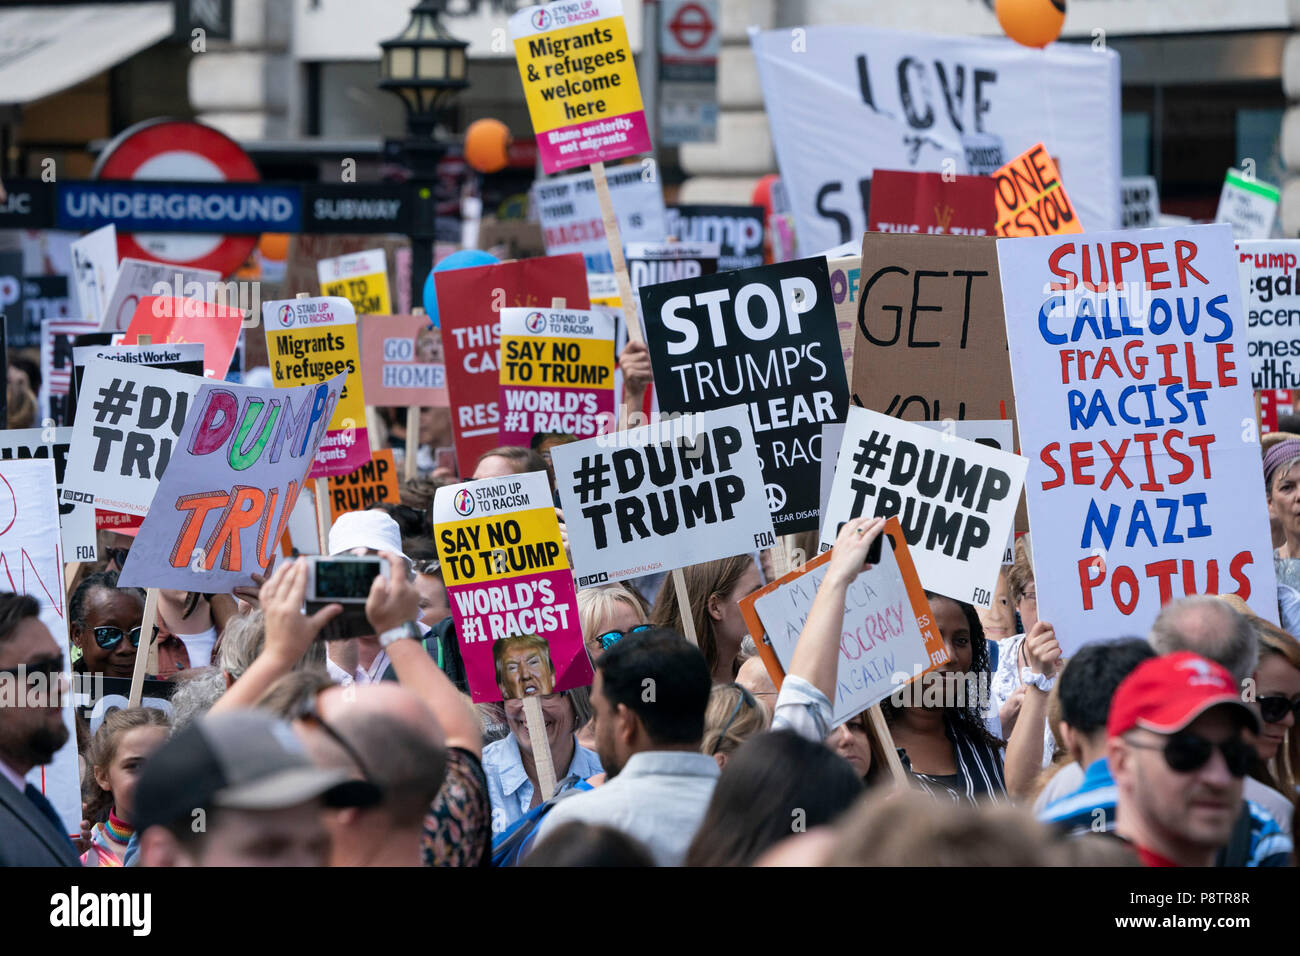 LONDON - JULY 13: A protest march against the visit to the UK by US President, Donald Trump, passes through Central London on July 13, 2018,. Photo by David Levenson Credit: David Levenson/Alamy Live News Stock Photo